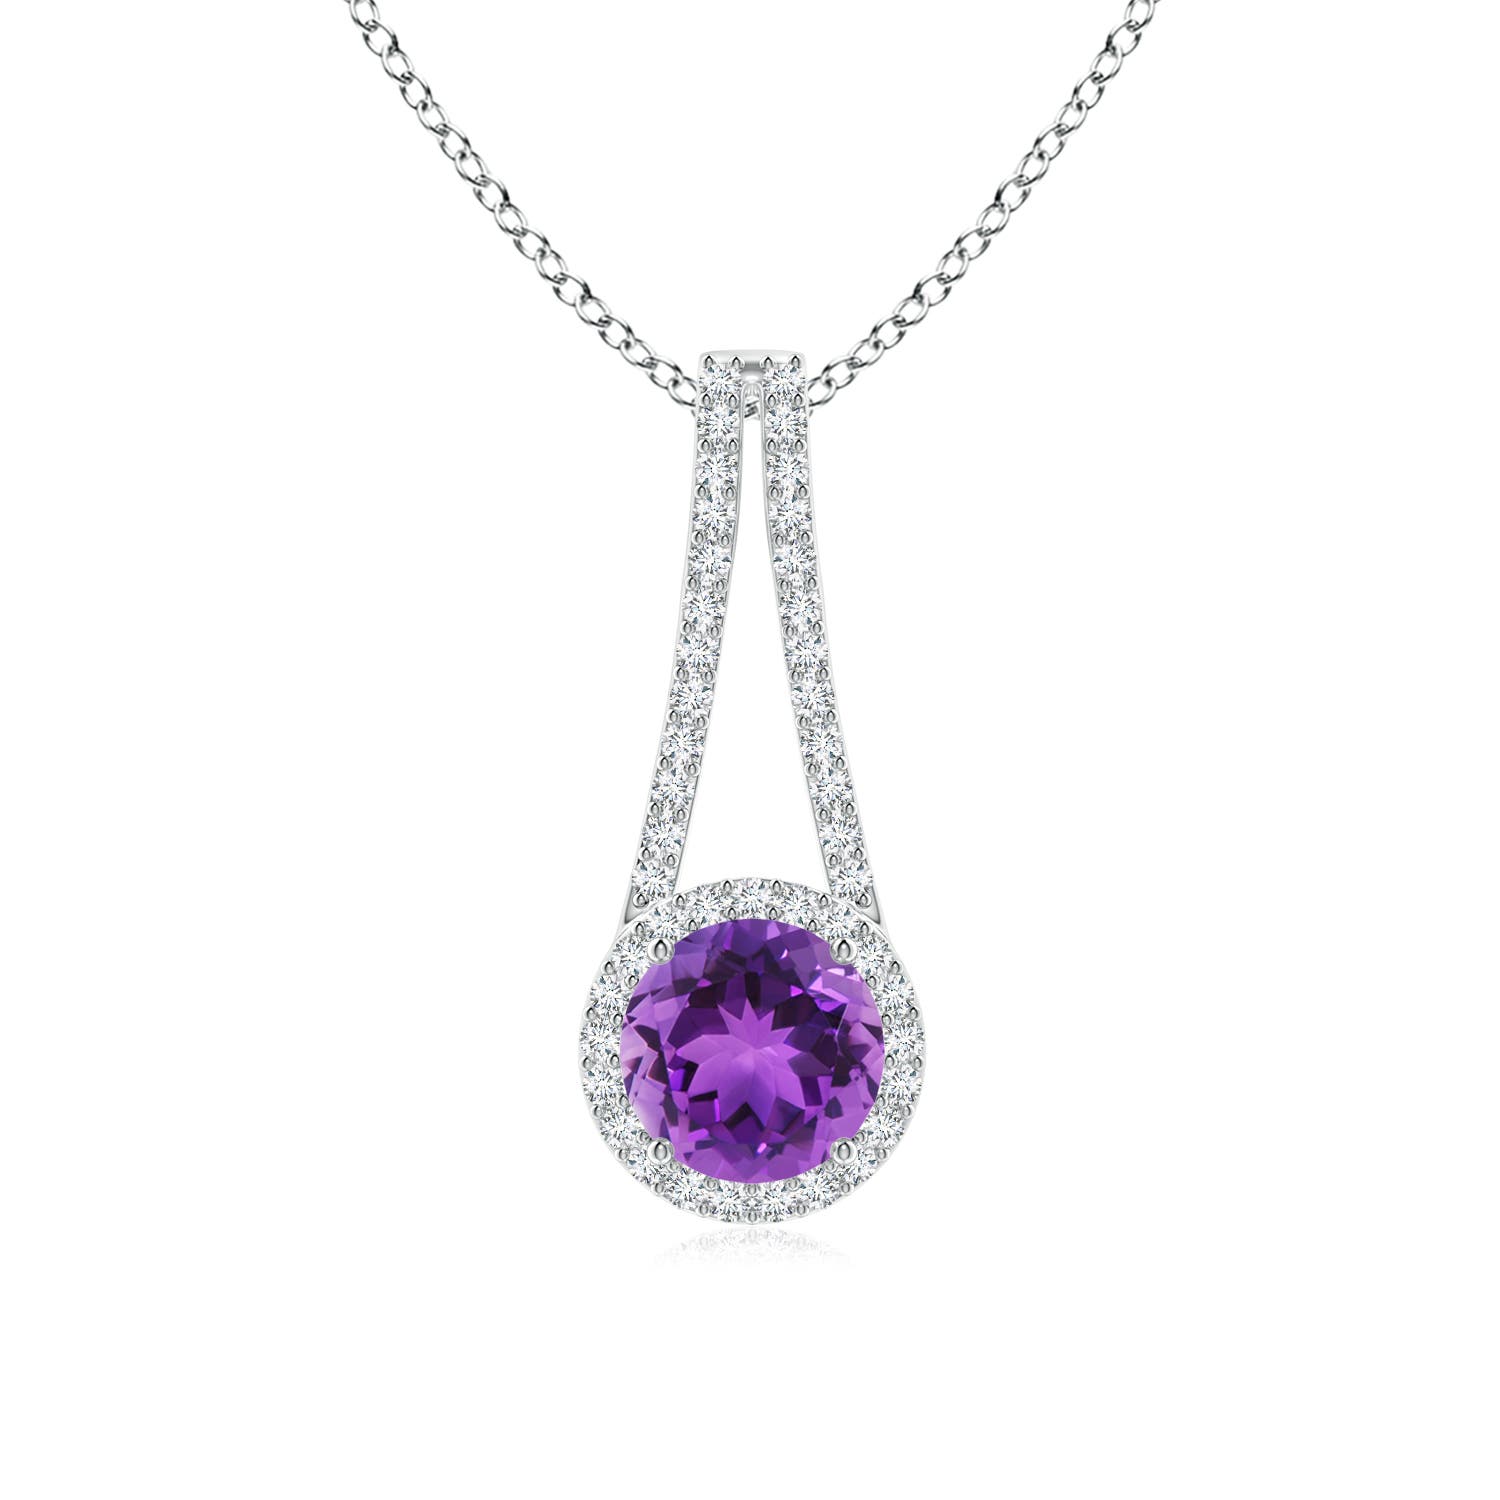 AAA - Amethyst / 1.42 CT / 14 KT White Gold